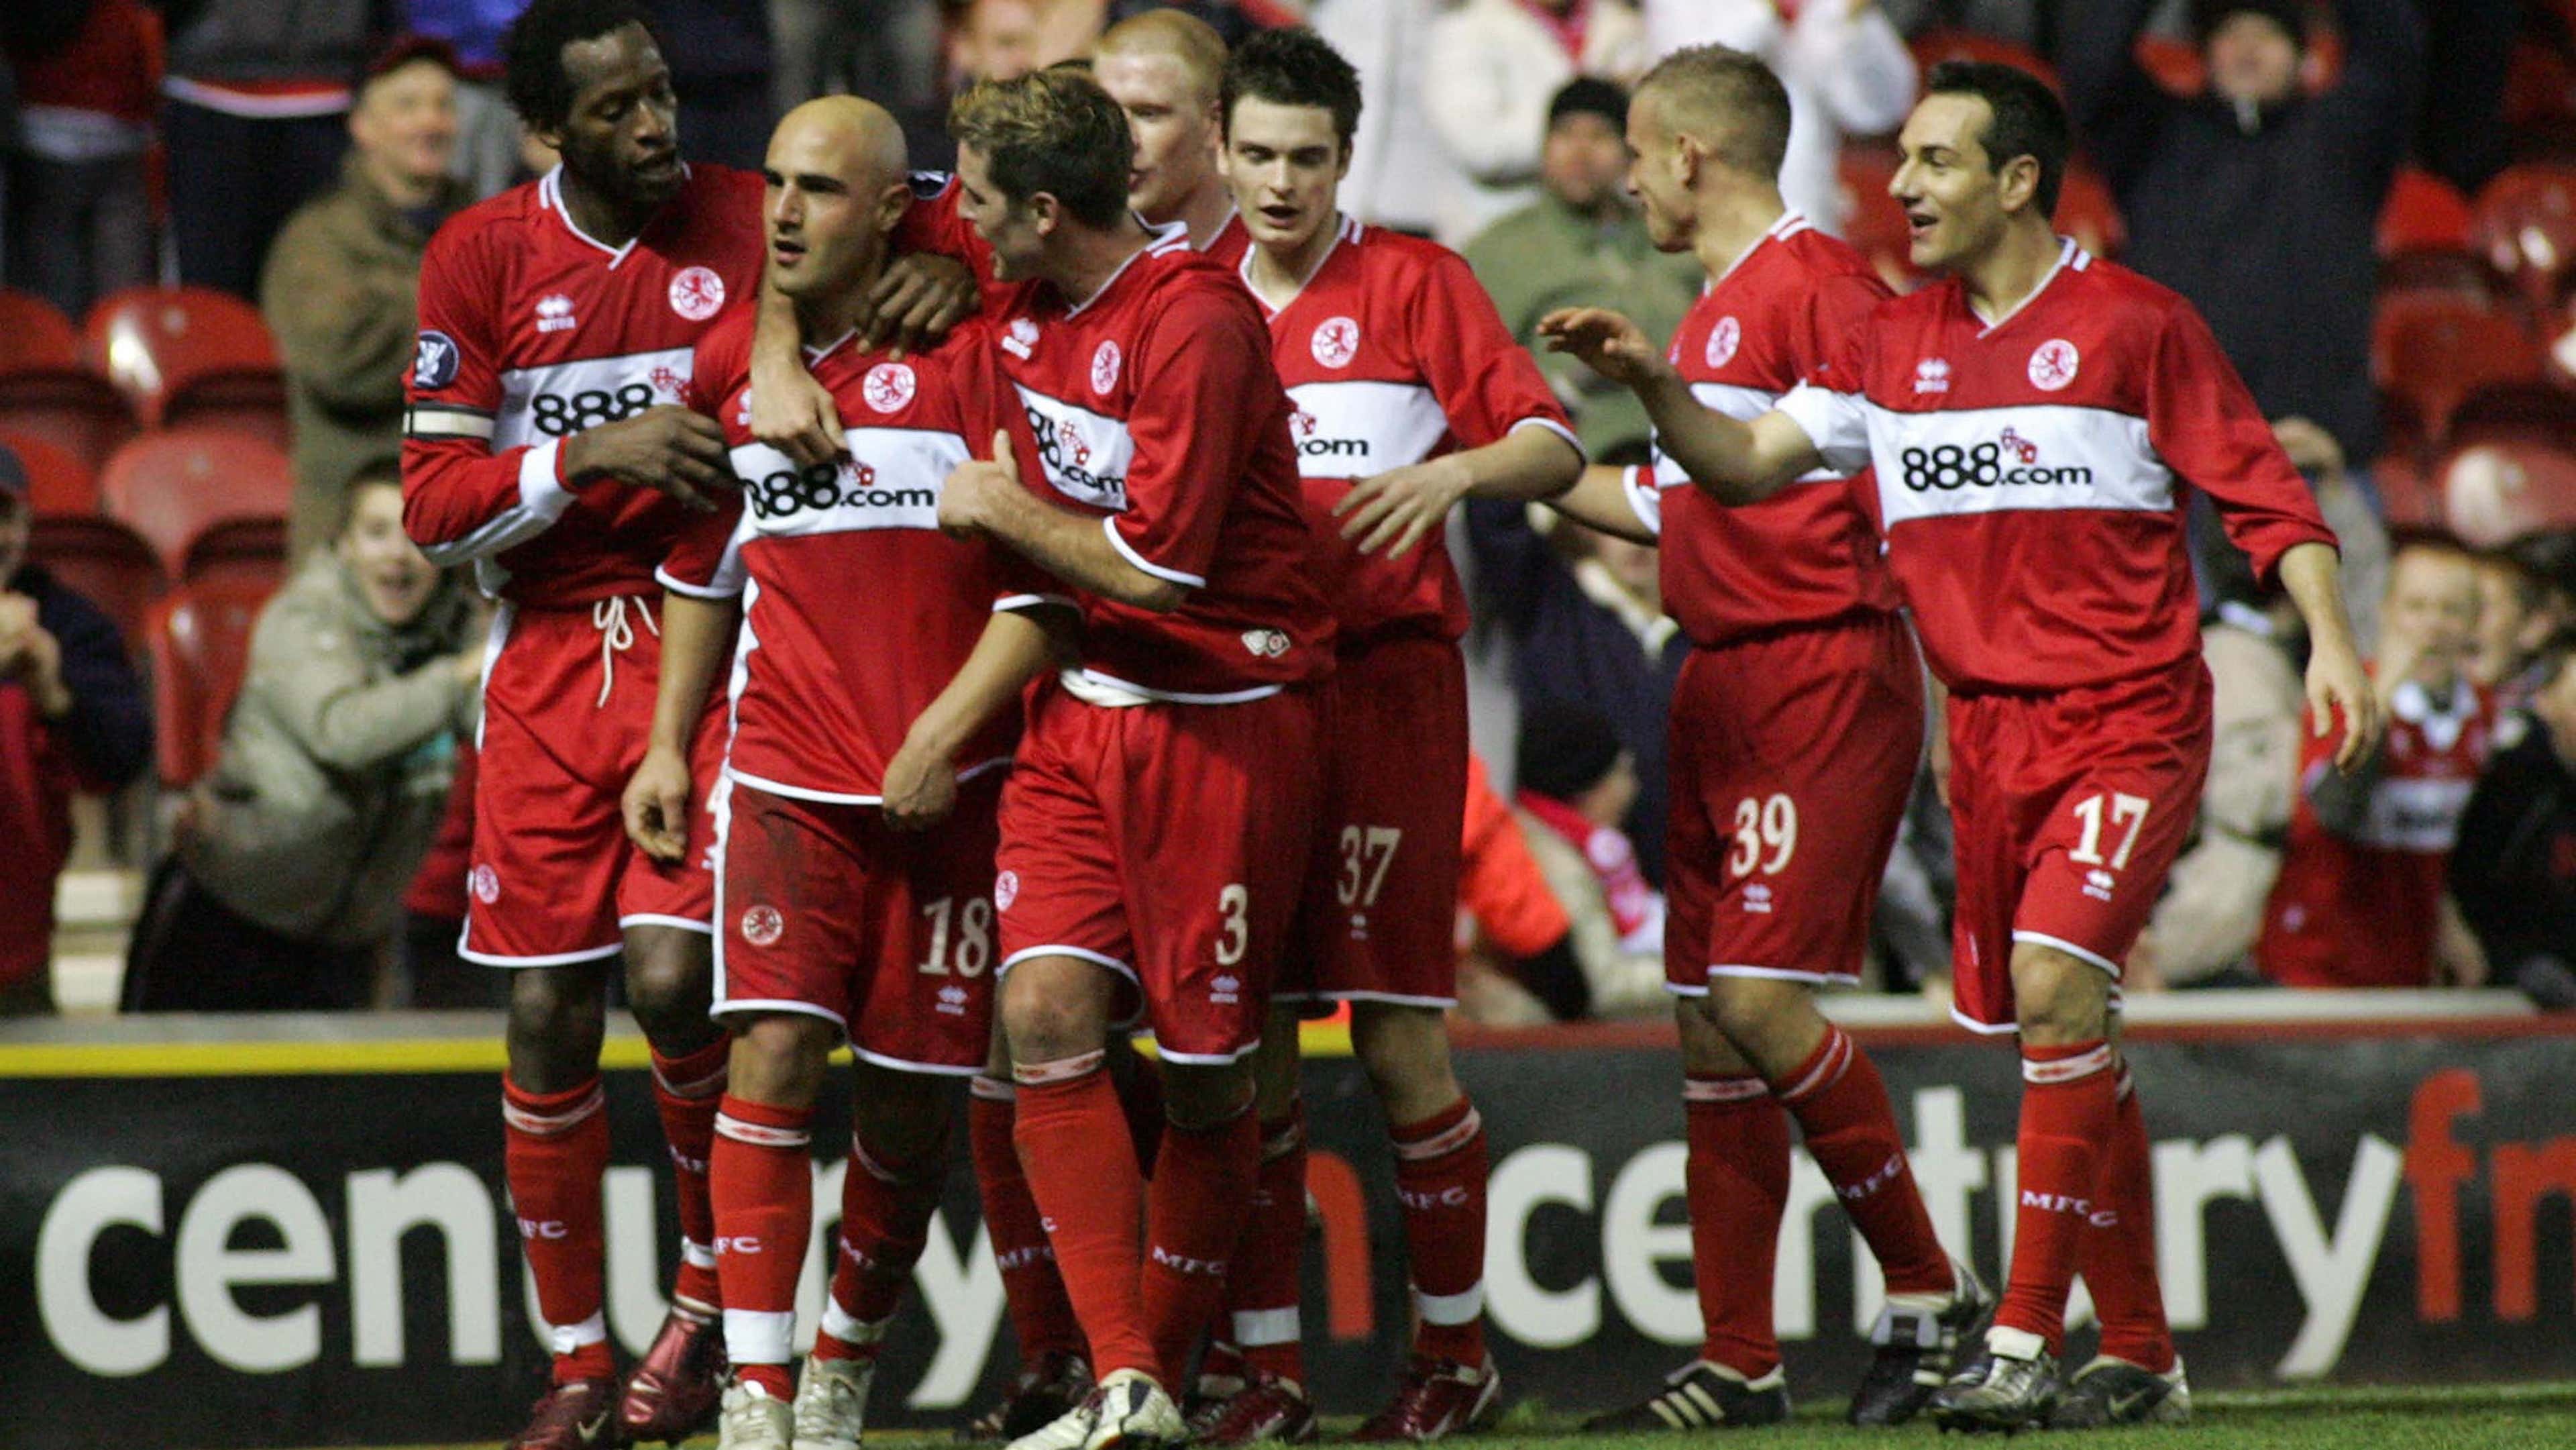 Middlesbrough 2005/06